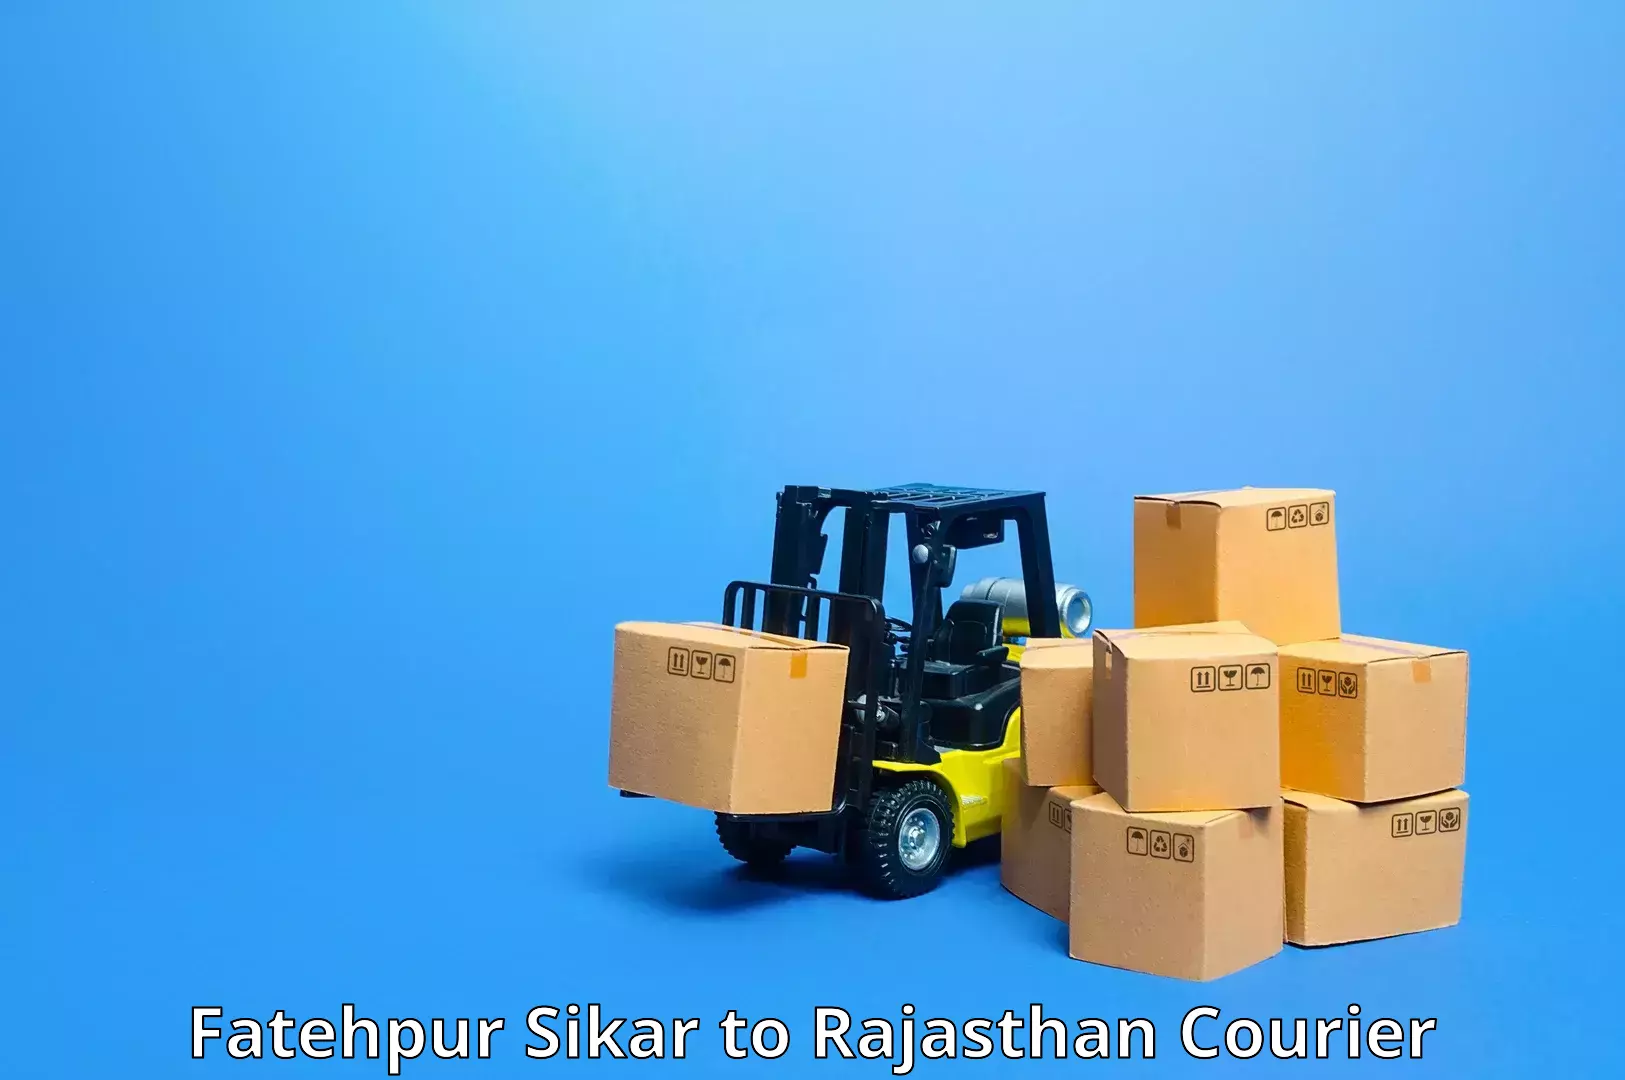 Sustainable delivery practices Fatehpur Sikar to Chittorgarh